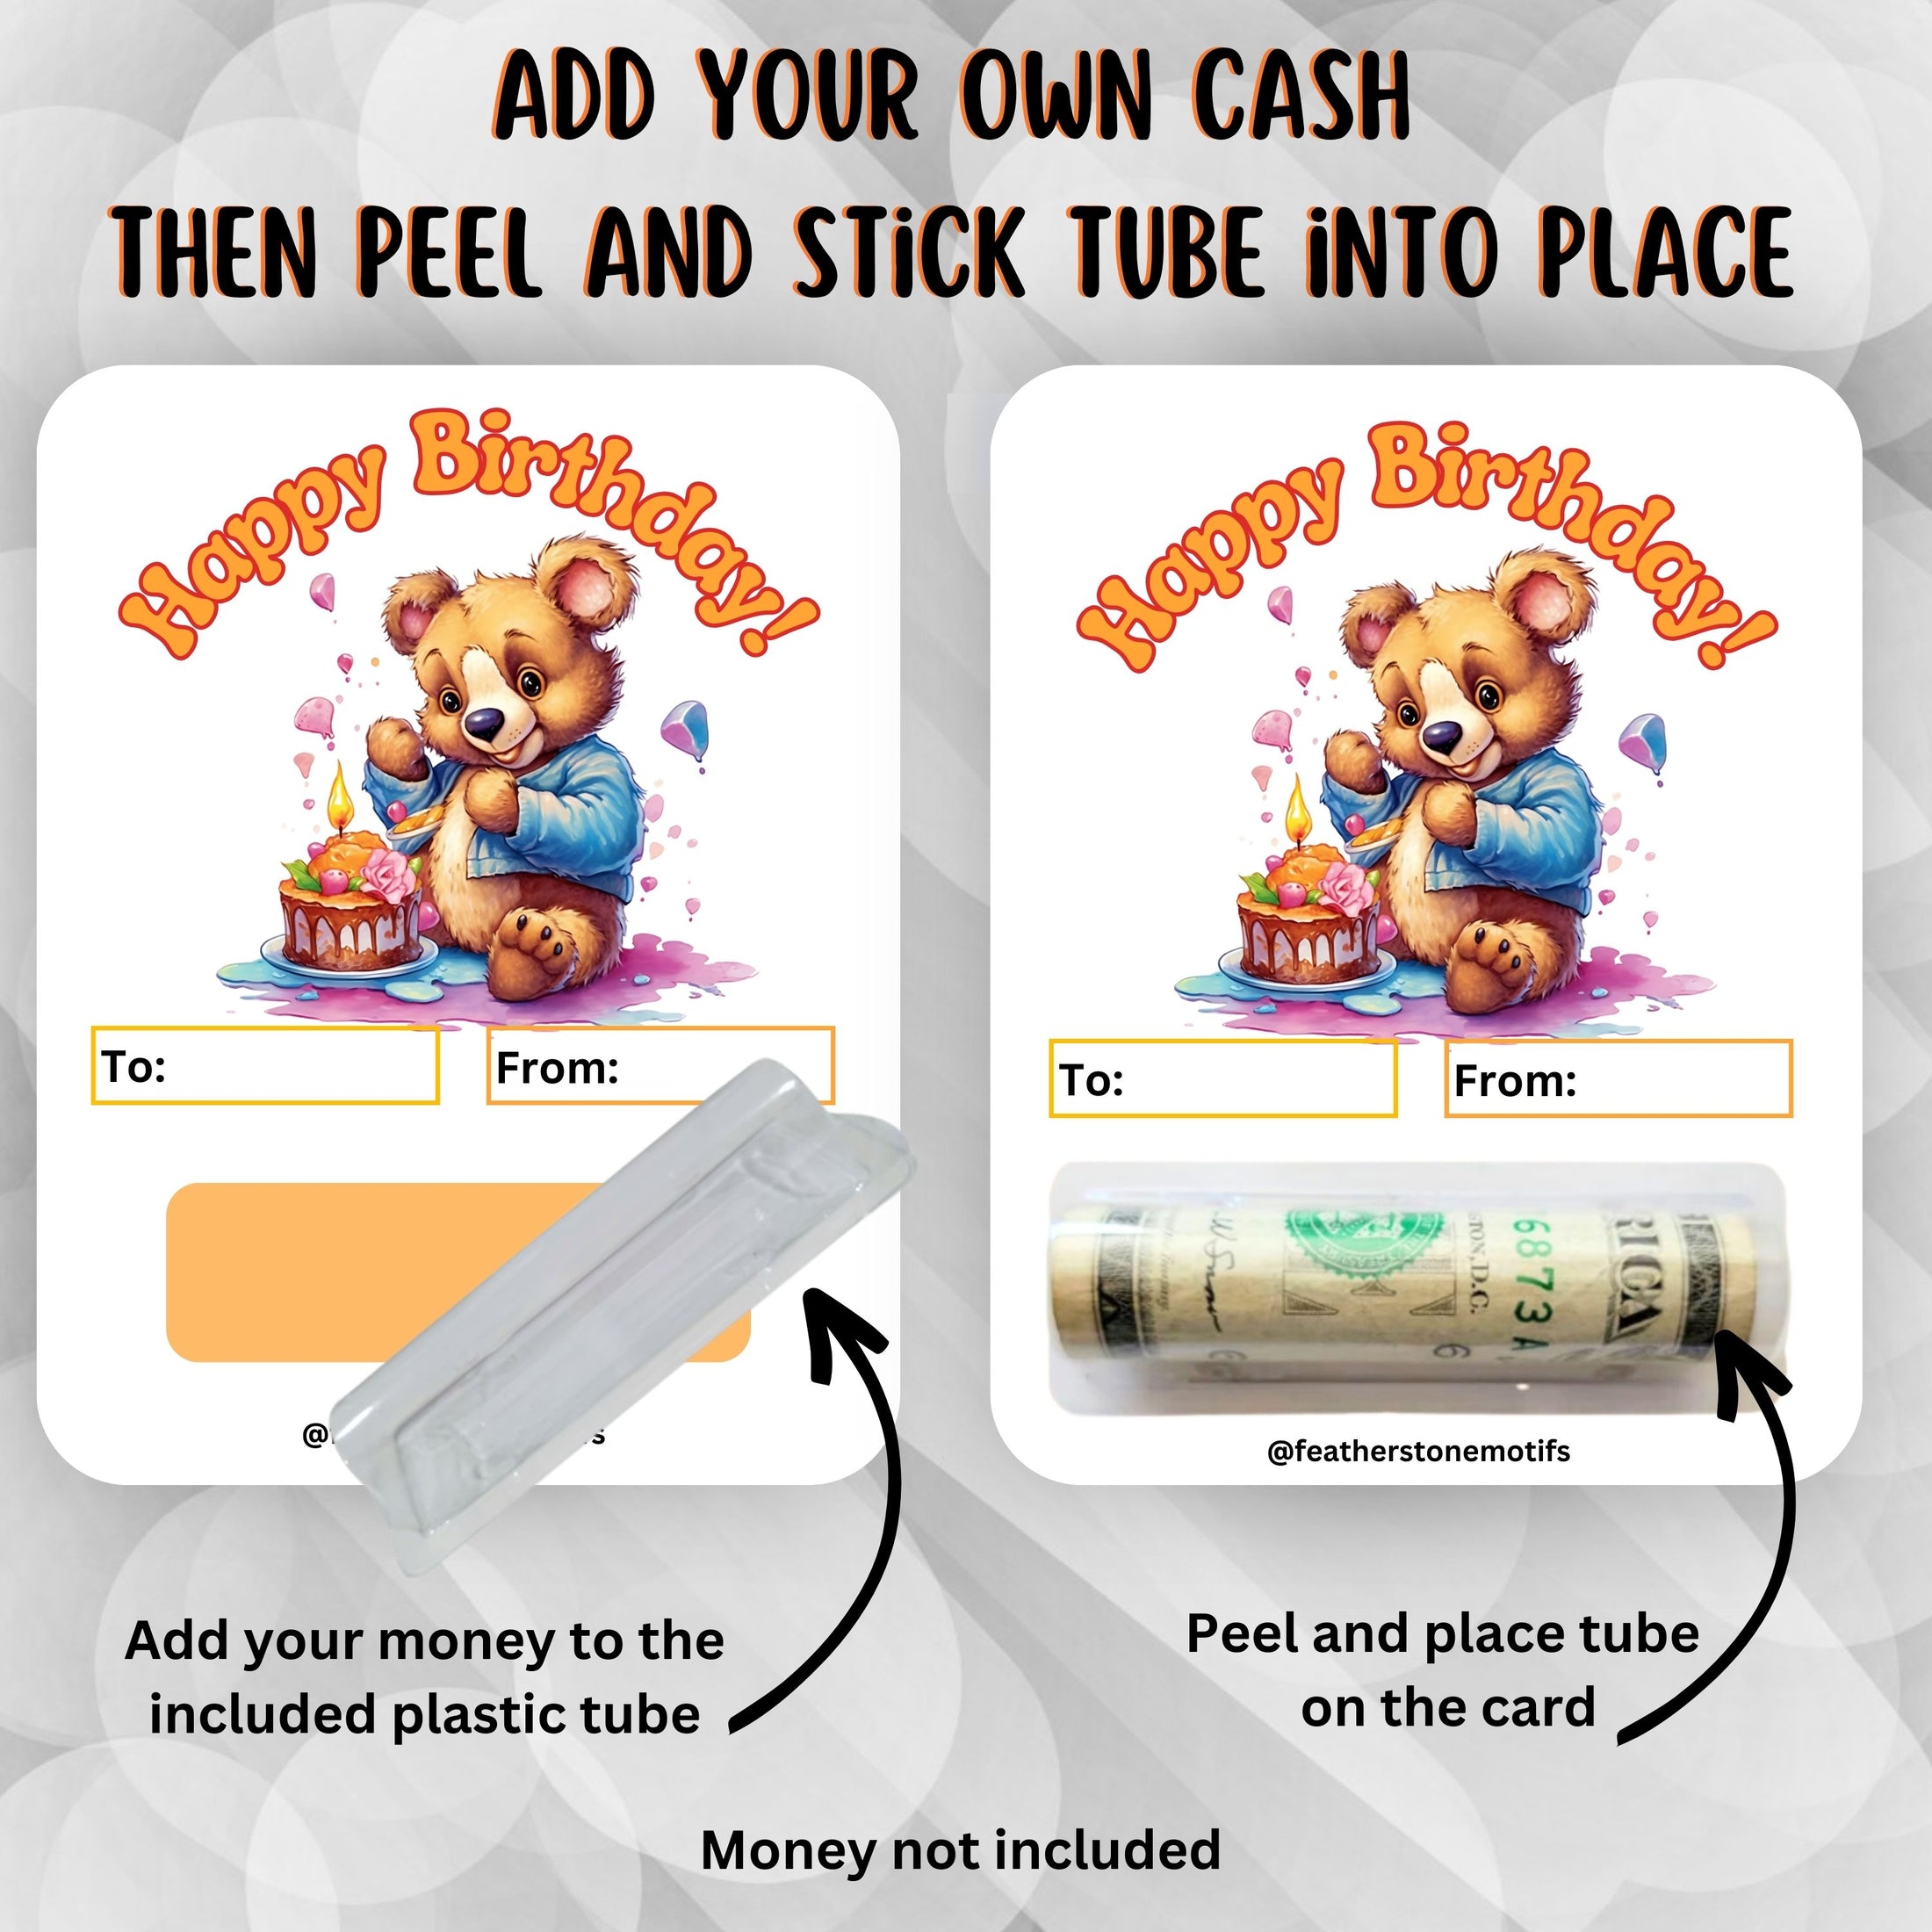 This image shows how to attach the money tube to the Bear Birthday money card.